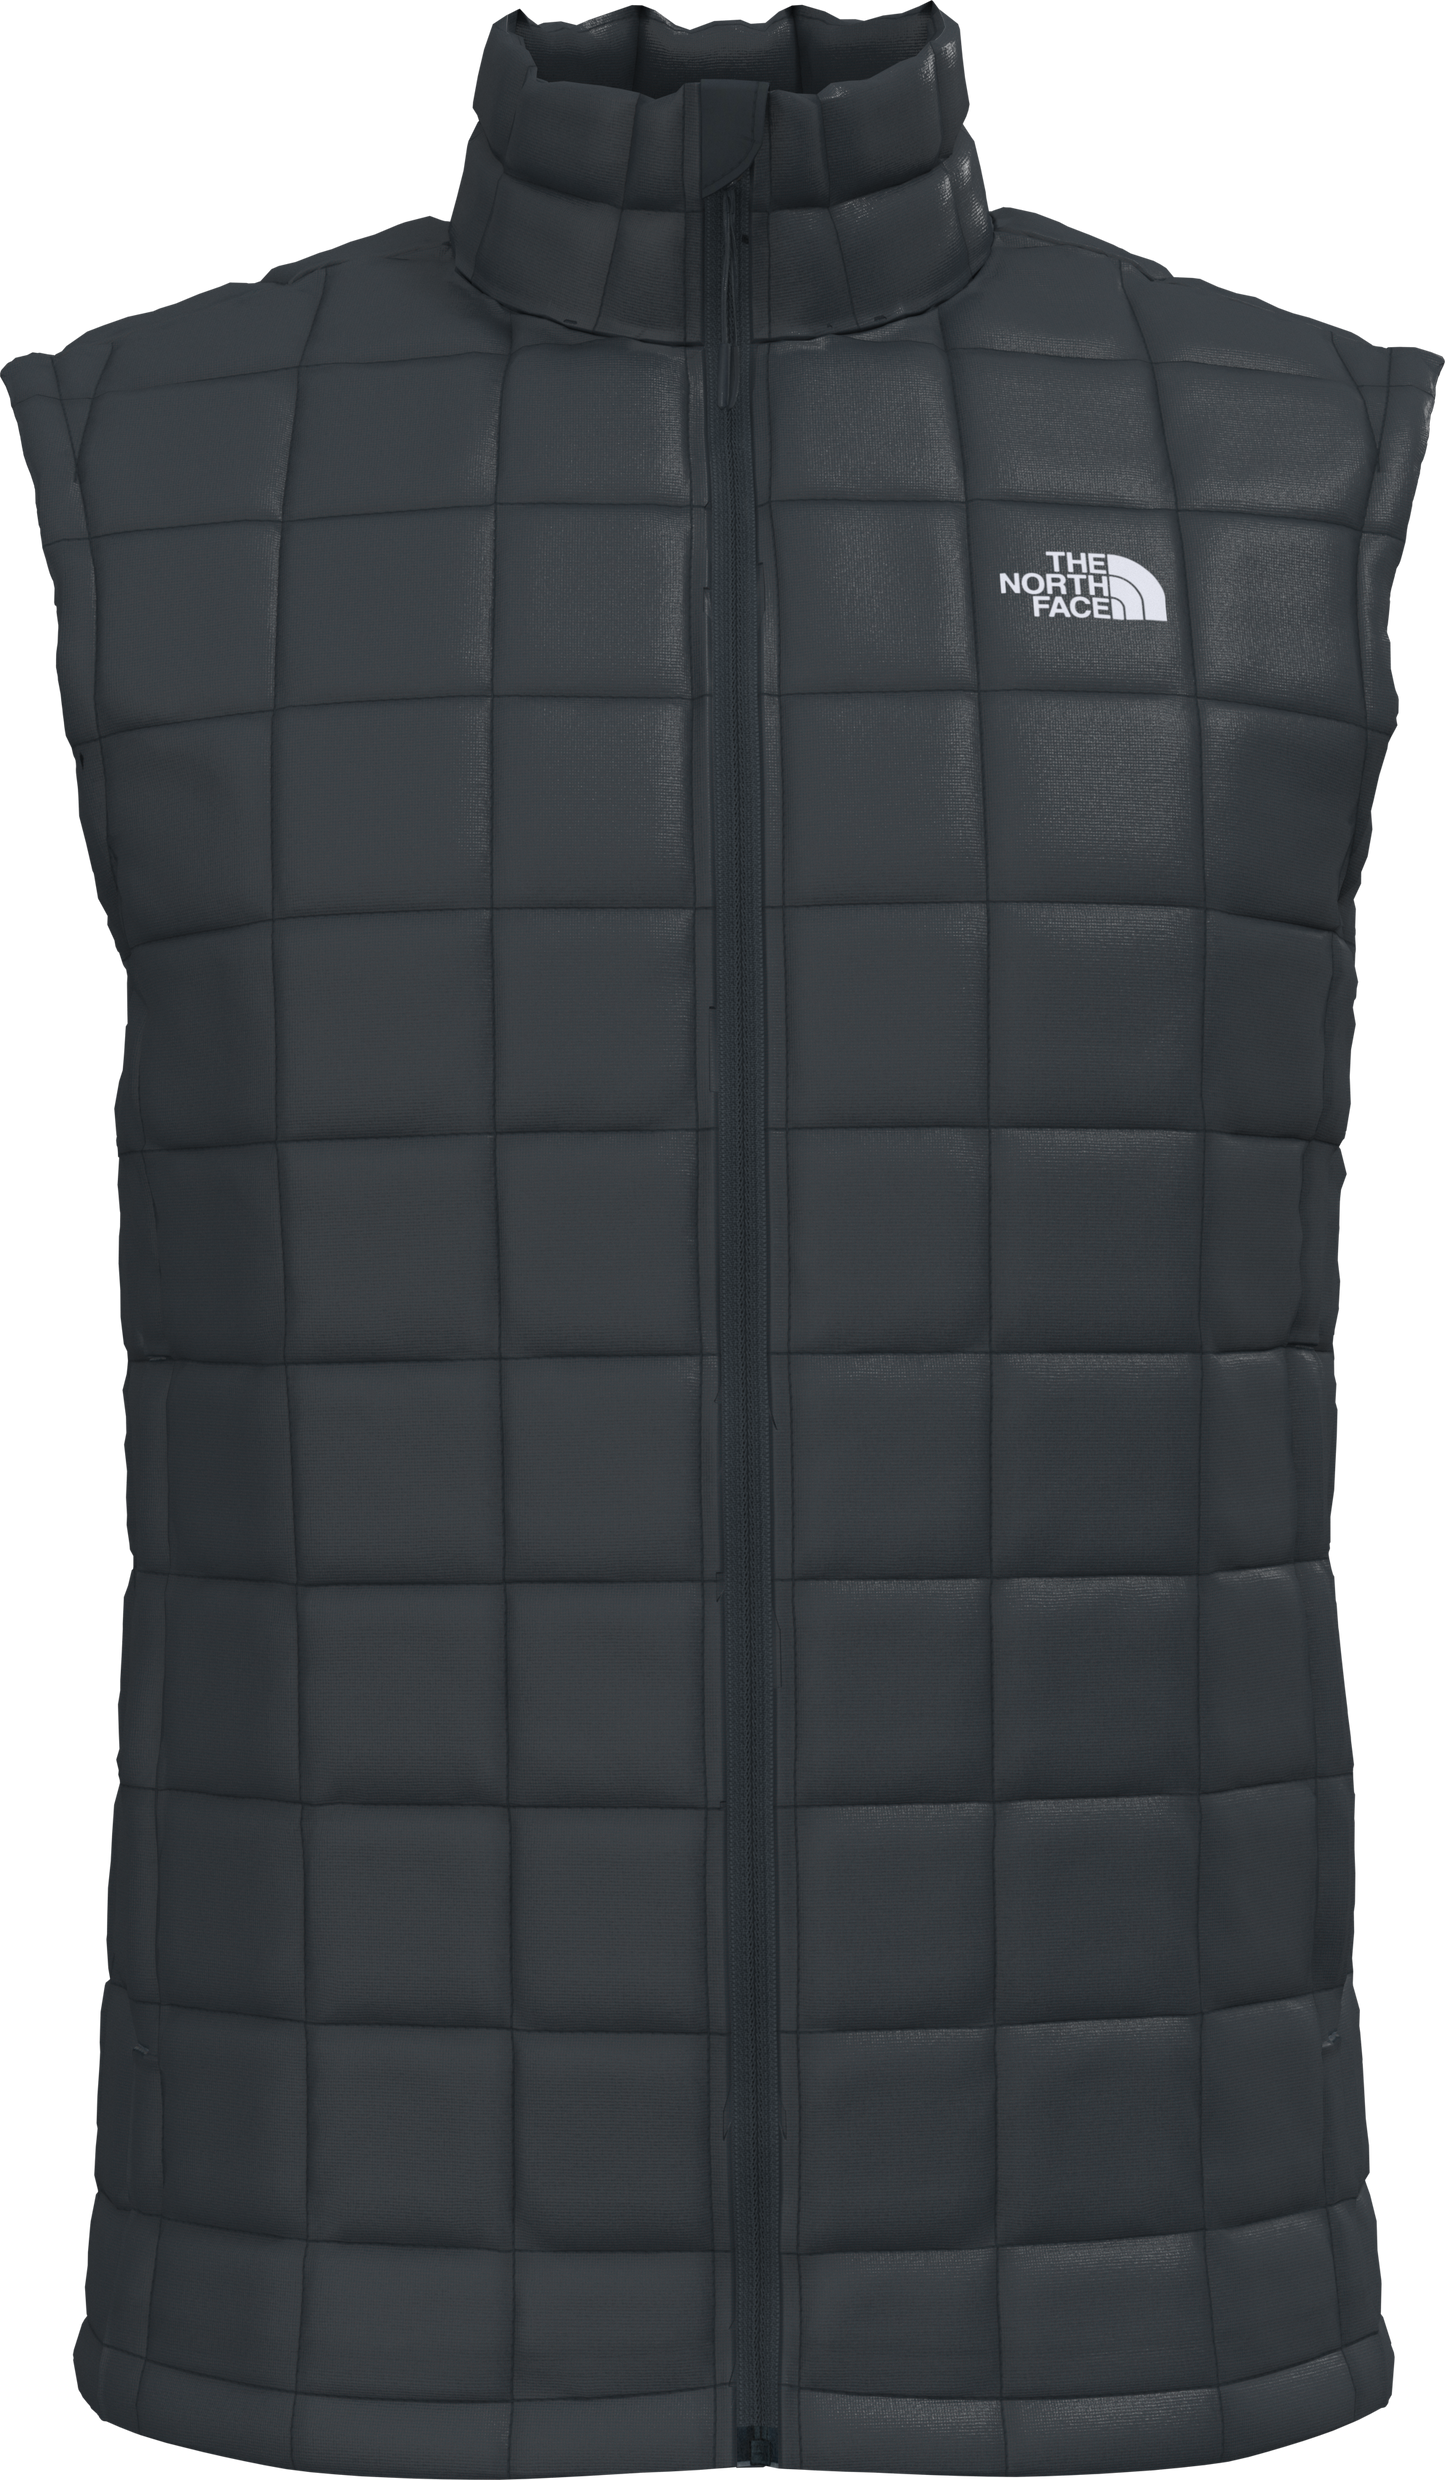 The North Face Apparel Men's Thermoball Eco Vest 2.0 Tnf Black